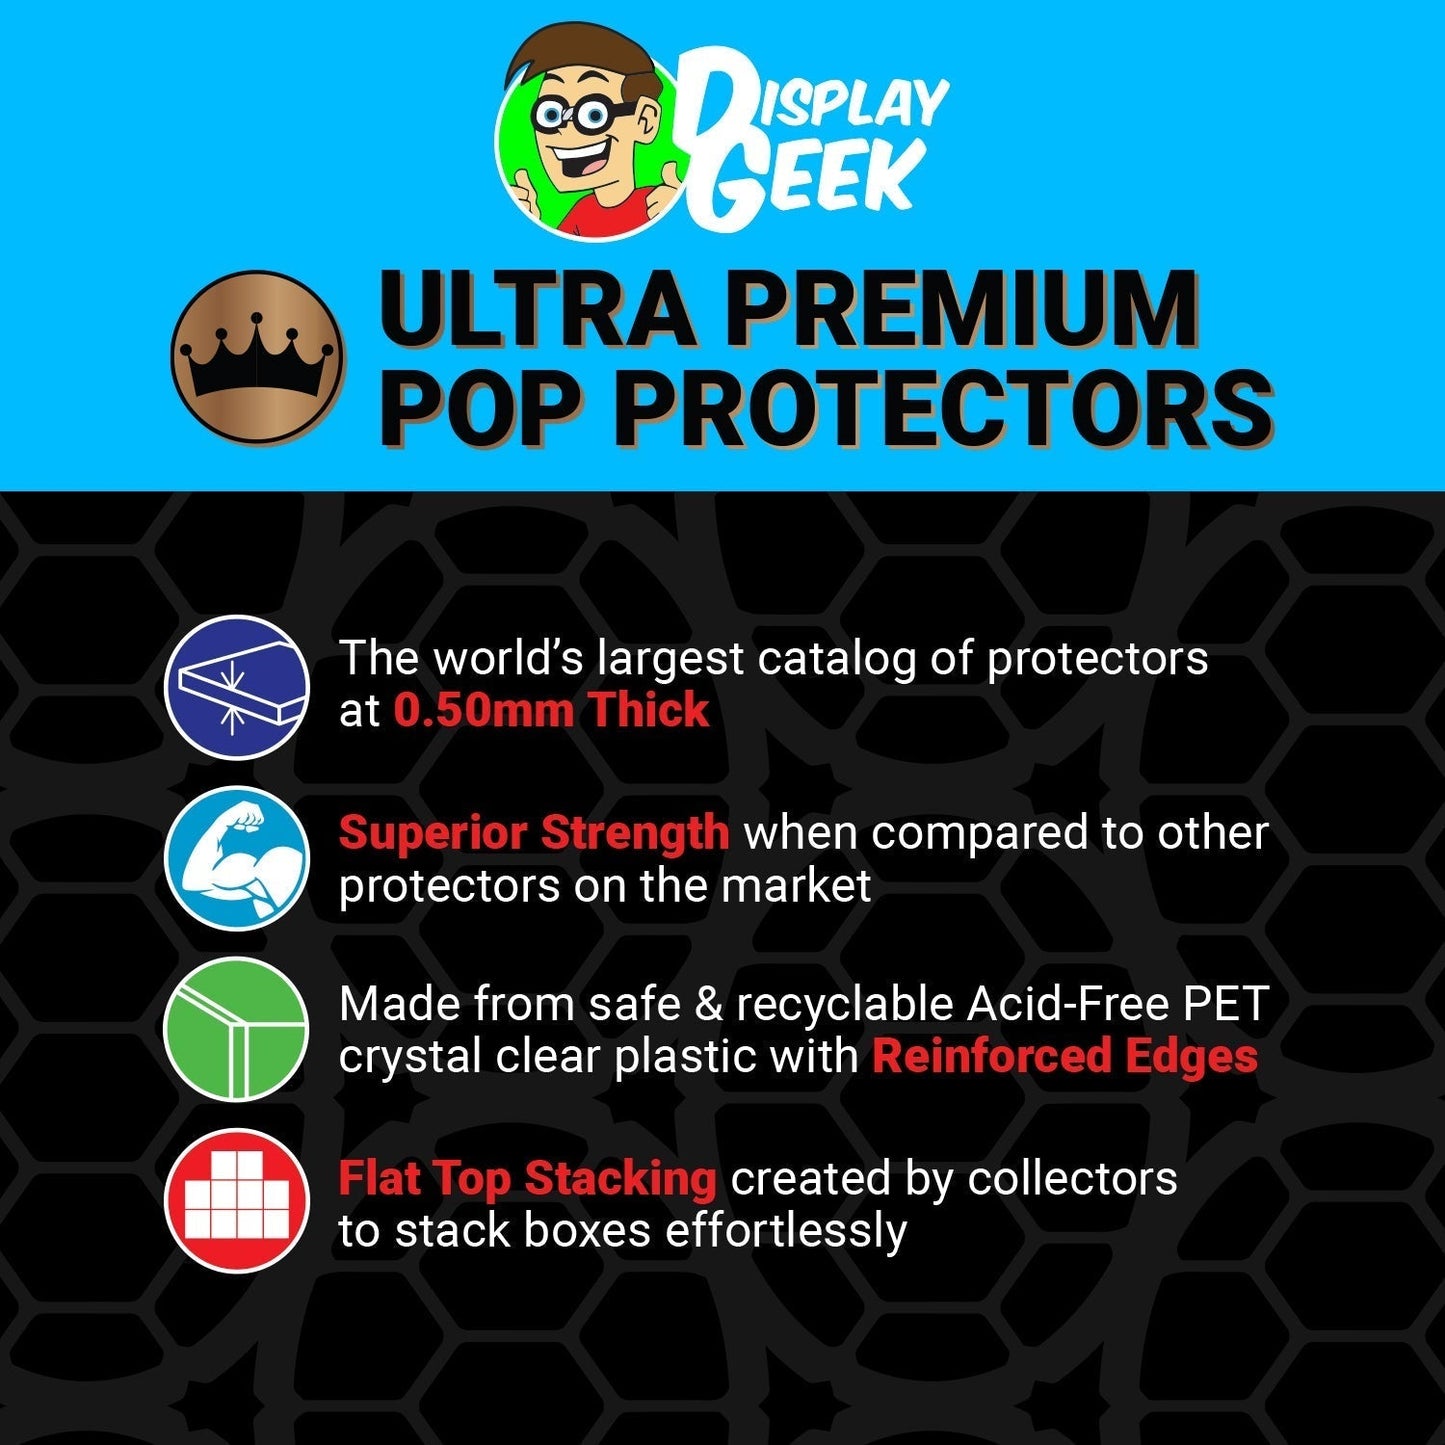 Pop Protector for Doc with Clock Tower #15 Funko Pop Town - PPG Pop Protector Guide Search Created by Display Geek